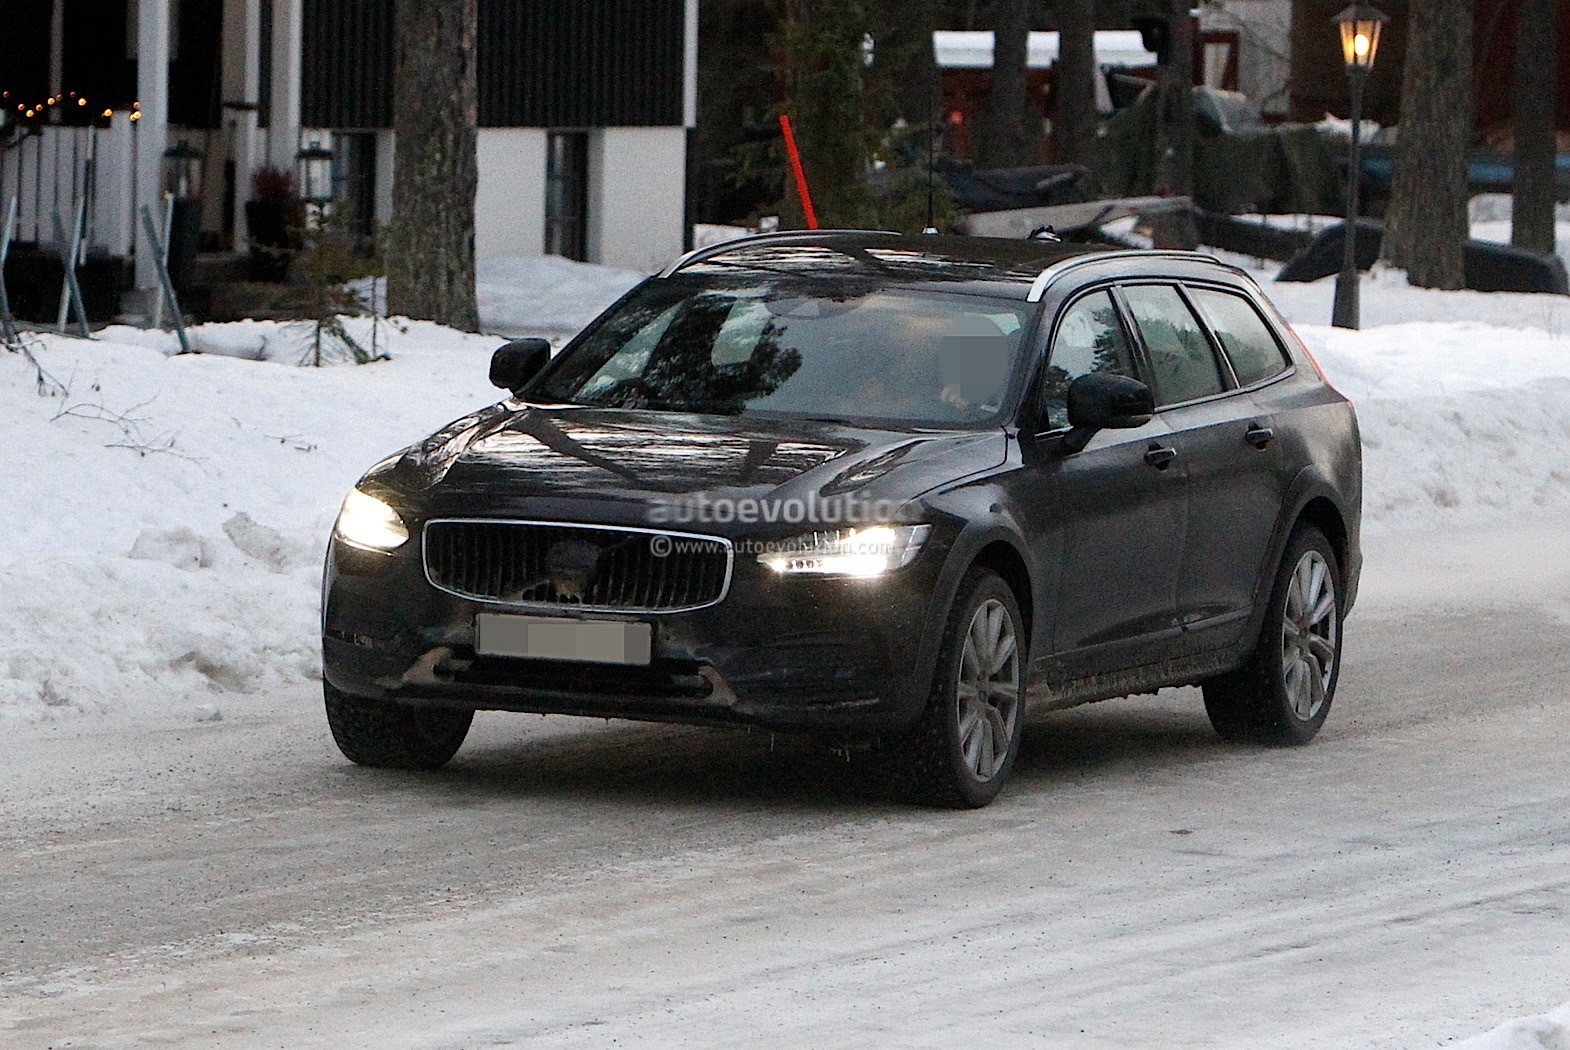 https://s1.cdn.autoevolution.com/images/news/gallery/2021-volvo-s90-and-v90-facelift-wear-useless-camouflage-winter-testing_1.jpg